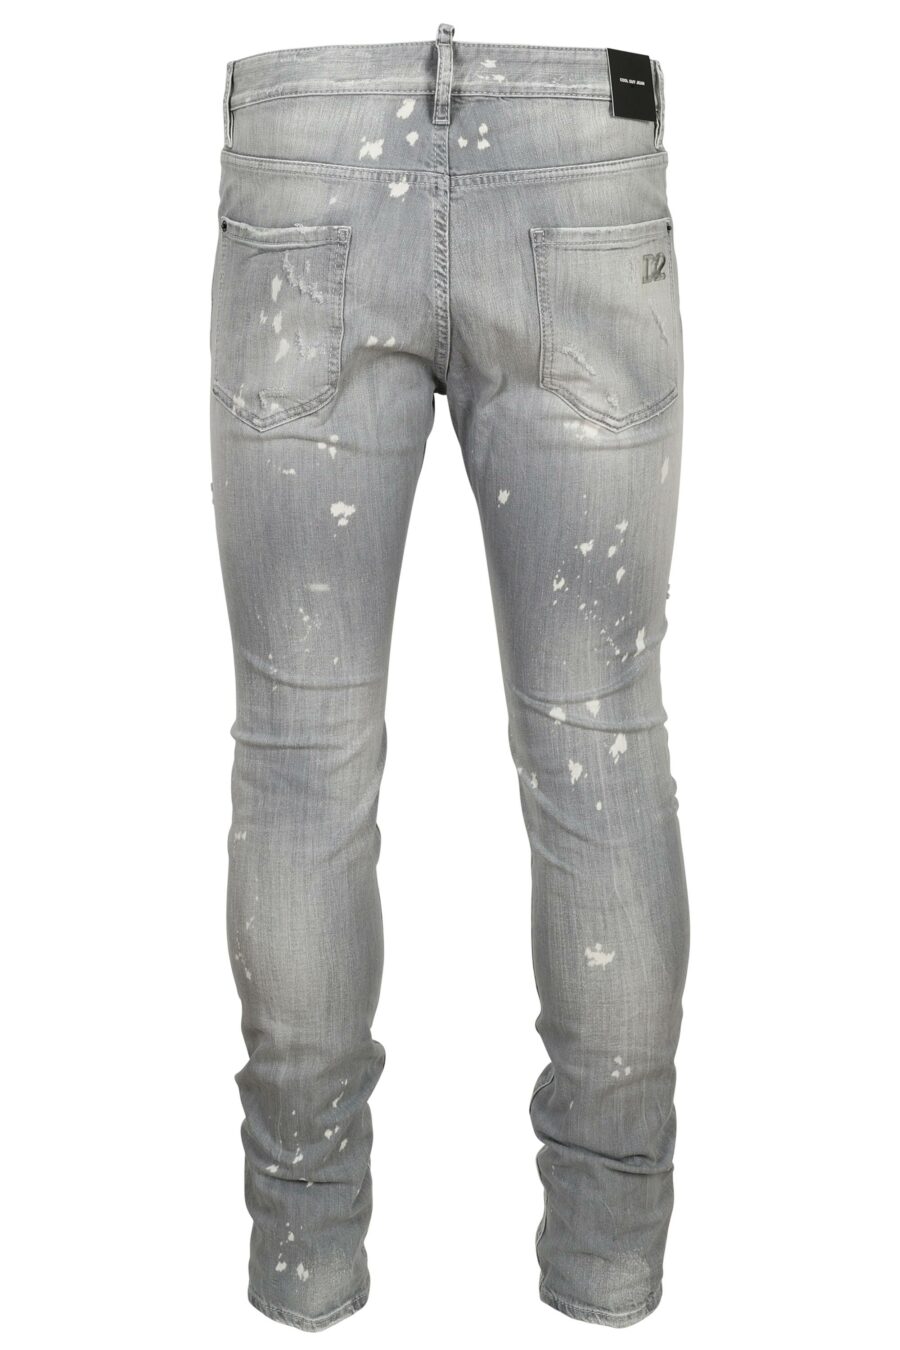 Grey "cool guy jean" trousers with white paint and rips - 8054148474218 1